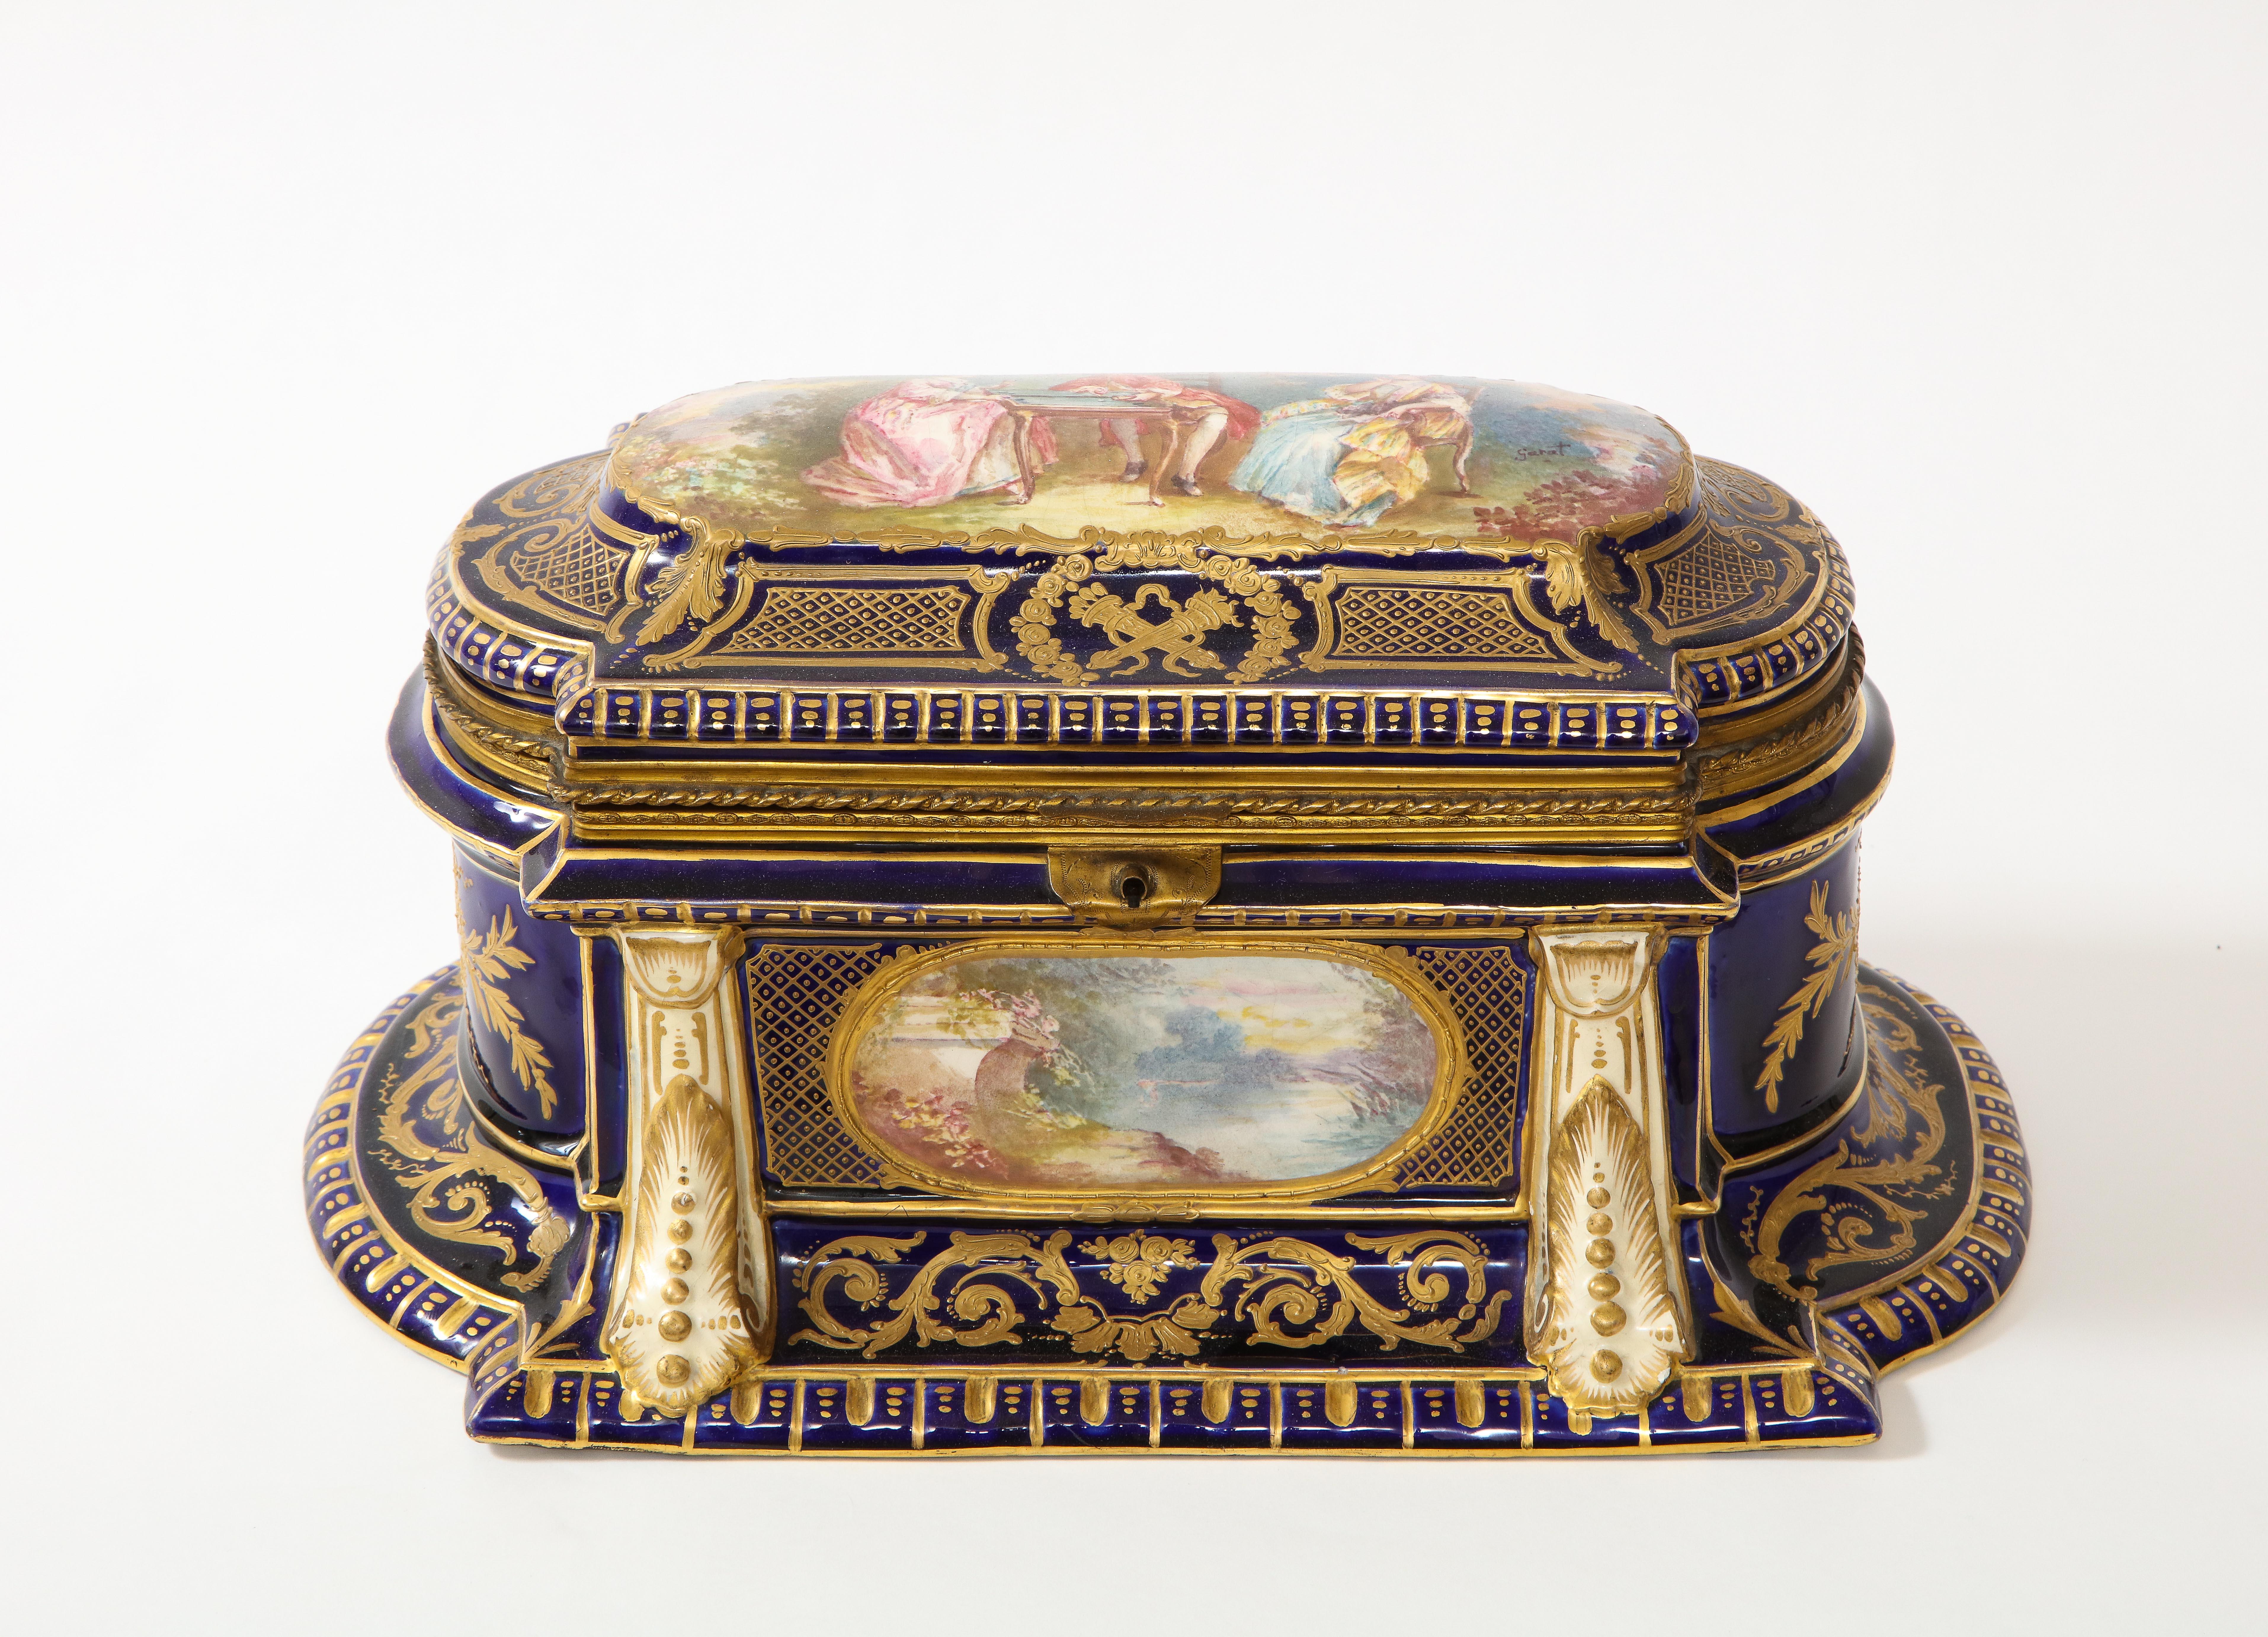 A very large and unusual 19th century French Louis XVI style dore bronze mounted Sevres cobalt blue ground box signed Sarat. This box is truly a masterpiece. Sevres boxes, such as this one, are very unusual because of their large size, shape, and